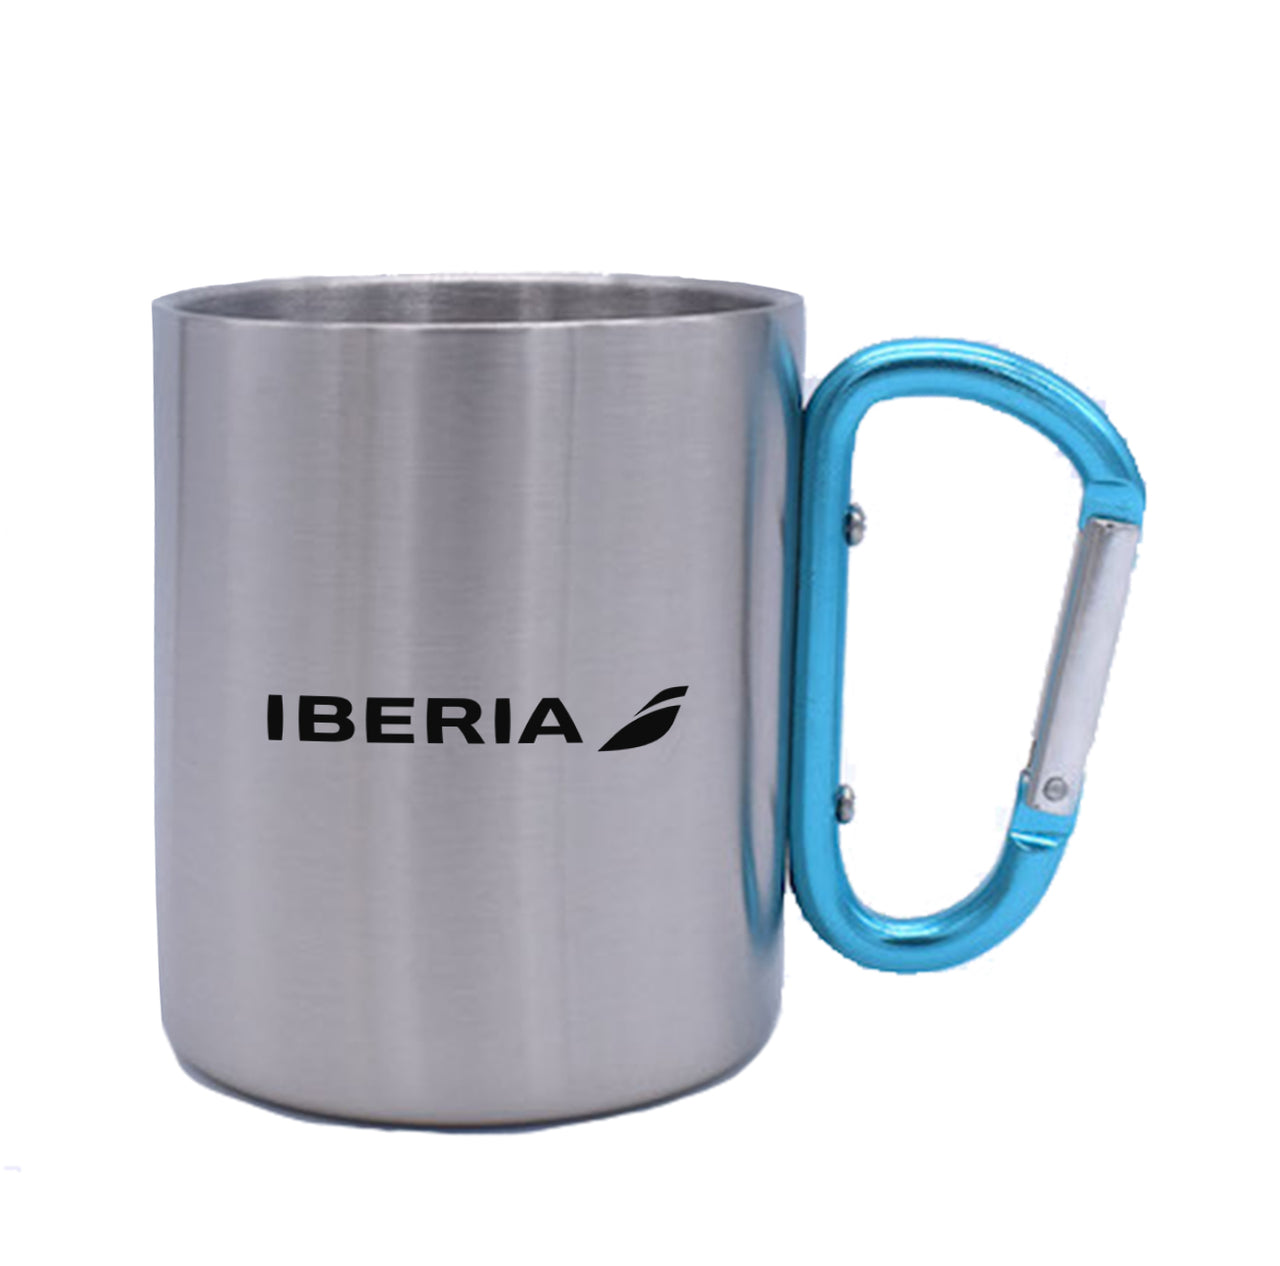 Iberia Airlines Designed Stainless Steel Outdoors Mugs